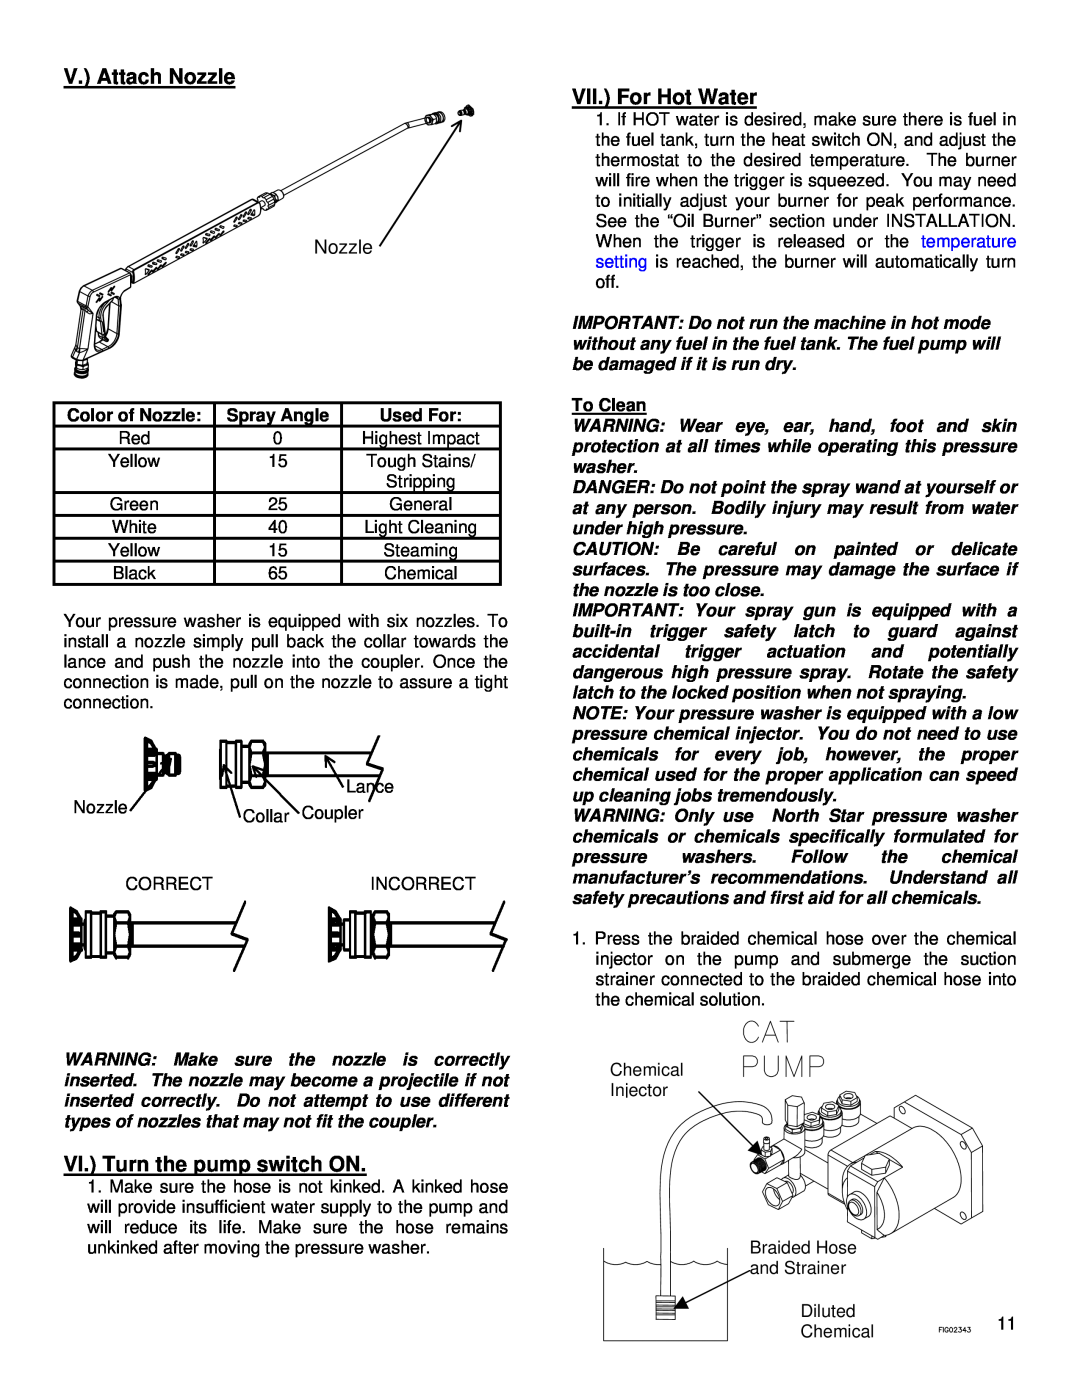 North Star M157305G specifications V. Attach Nozzle, VI. Turn the pump switch ON, VII. For Hot Water 